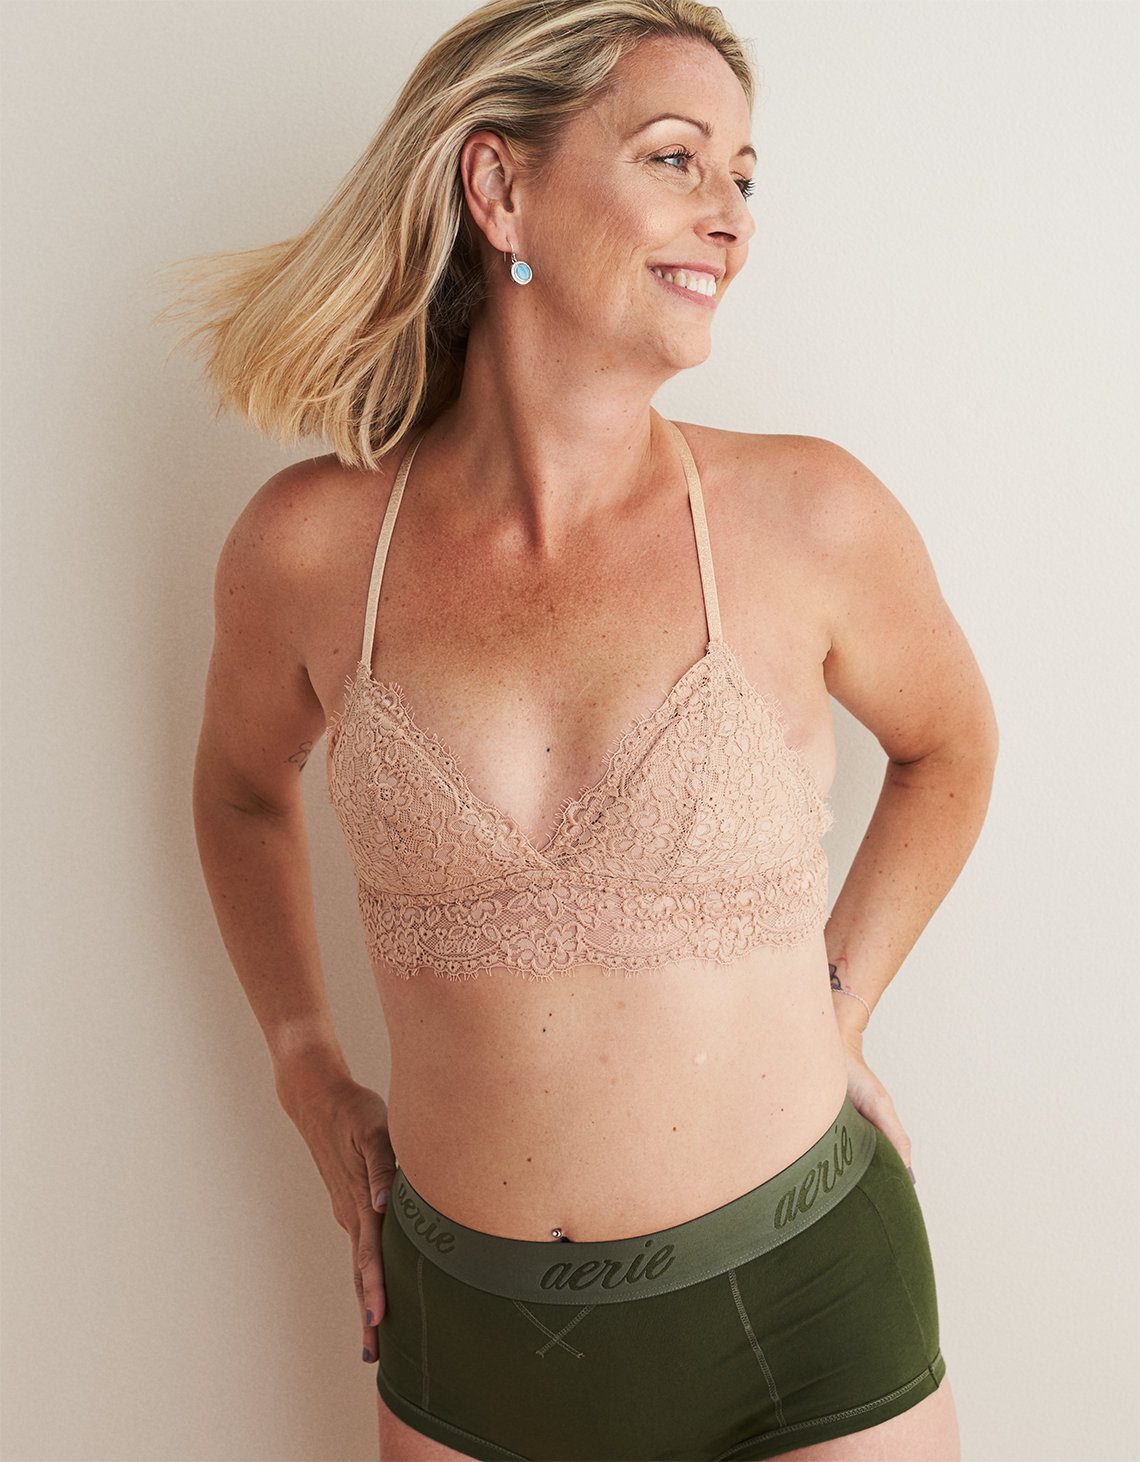 Aerie's New Campaign Features Women with Disabilities and